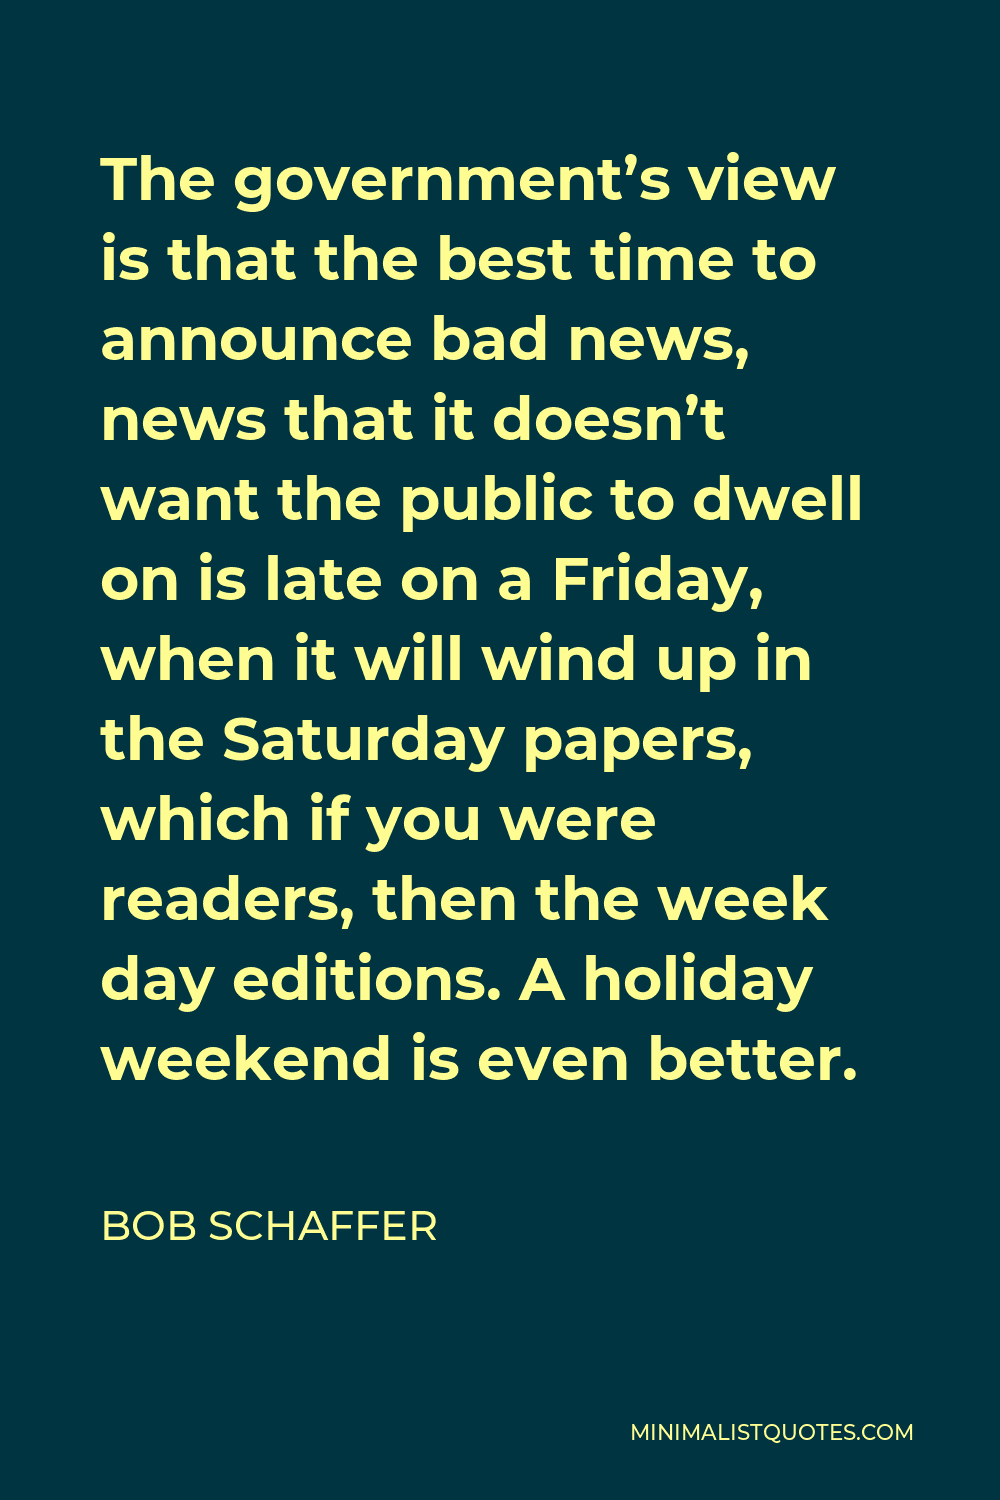 Bob Schaffer Quote - The government’s view is that the best time to announce bad news, news that it doesn’t want the public to dwell on is late on a Friday, when it will wind up in the Saturday papers, which if you were readers, then the week day editions. A holiday weekend is even better.